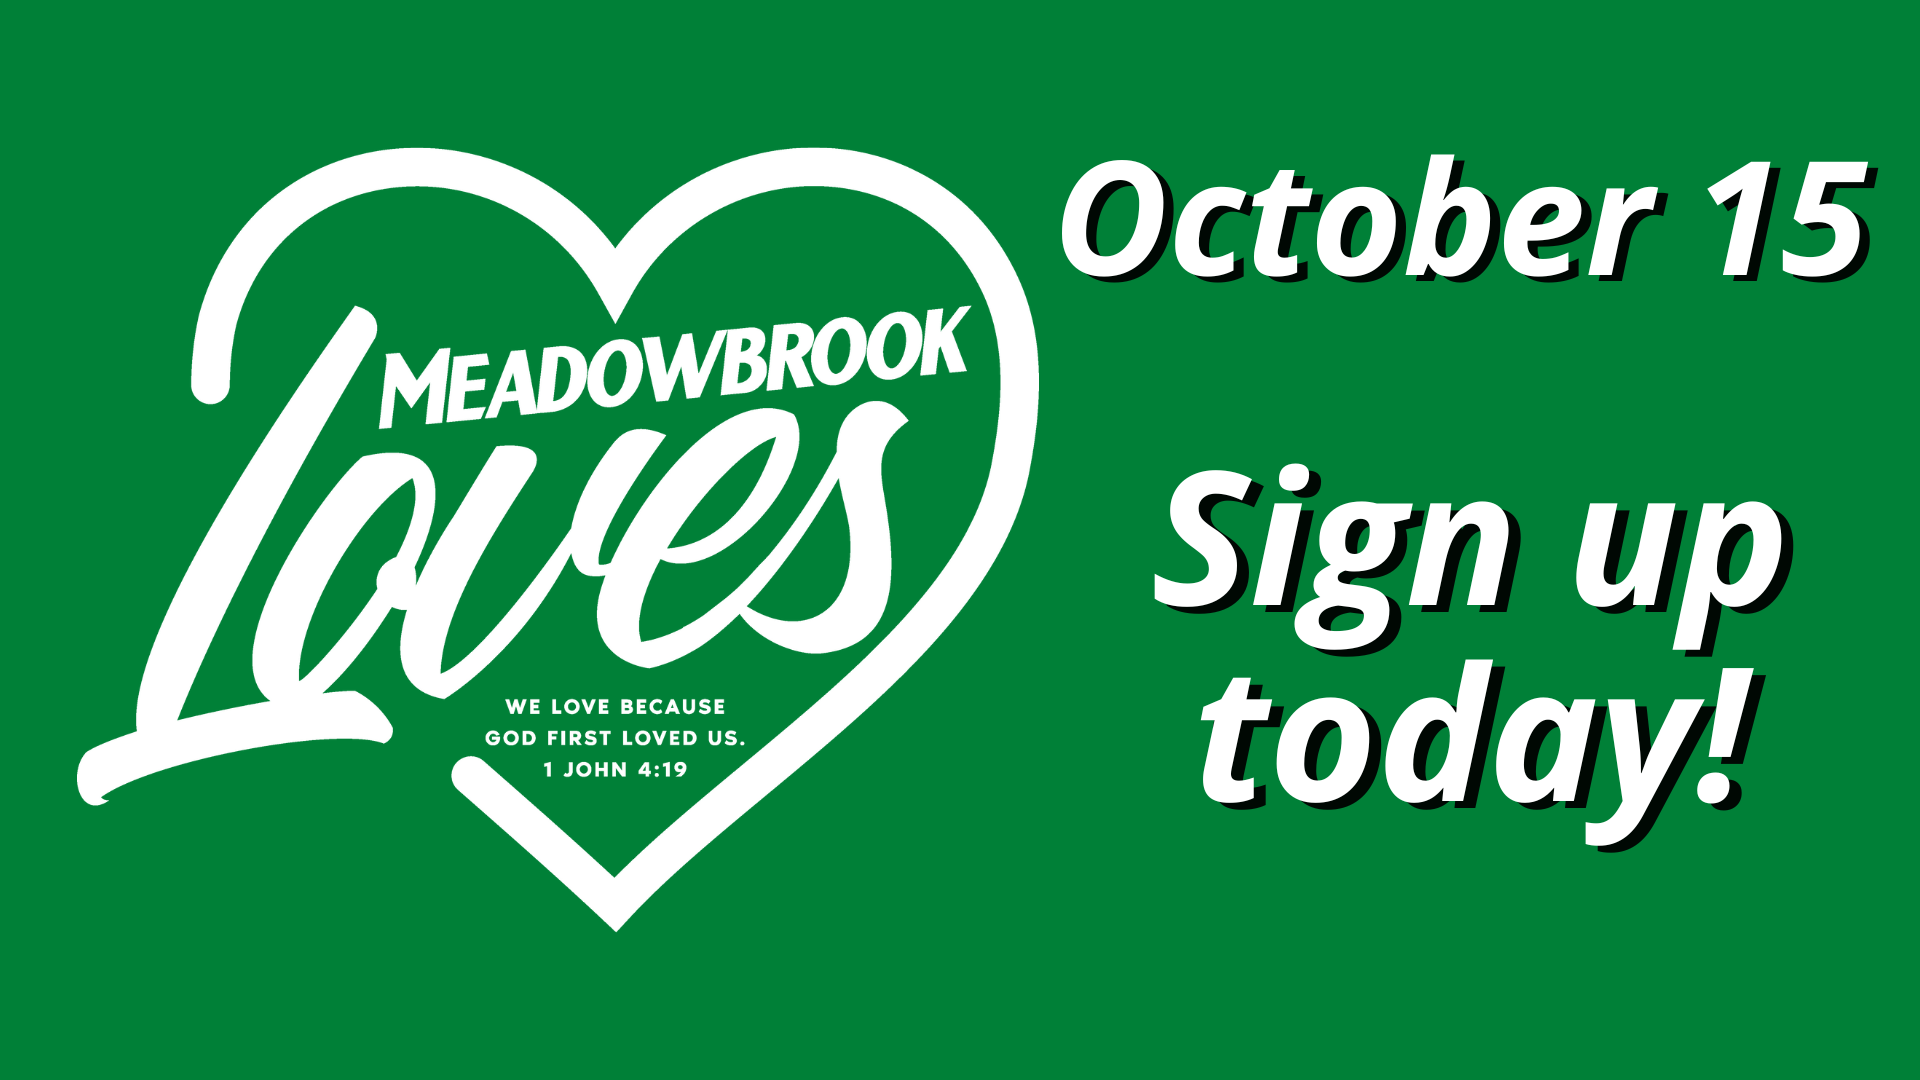 Meadowbrook LOVES GREEN Sign Up Oct 15 (1920 × 1080 px).png